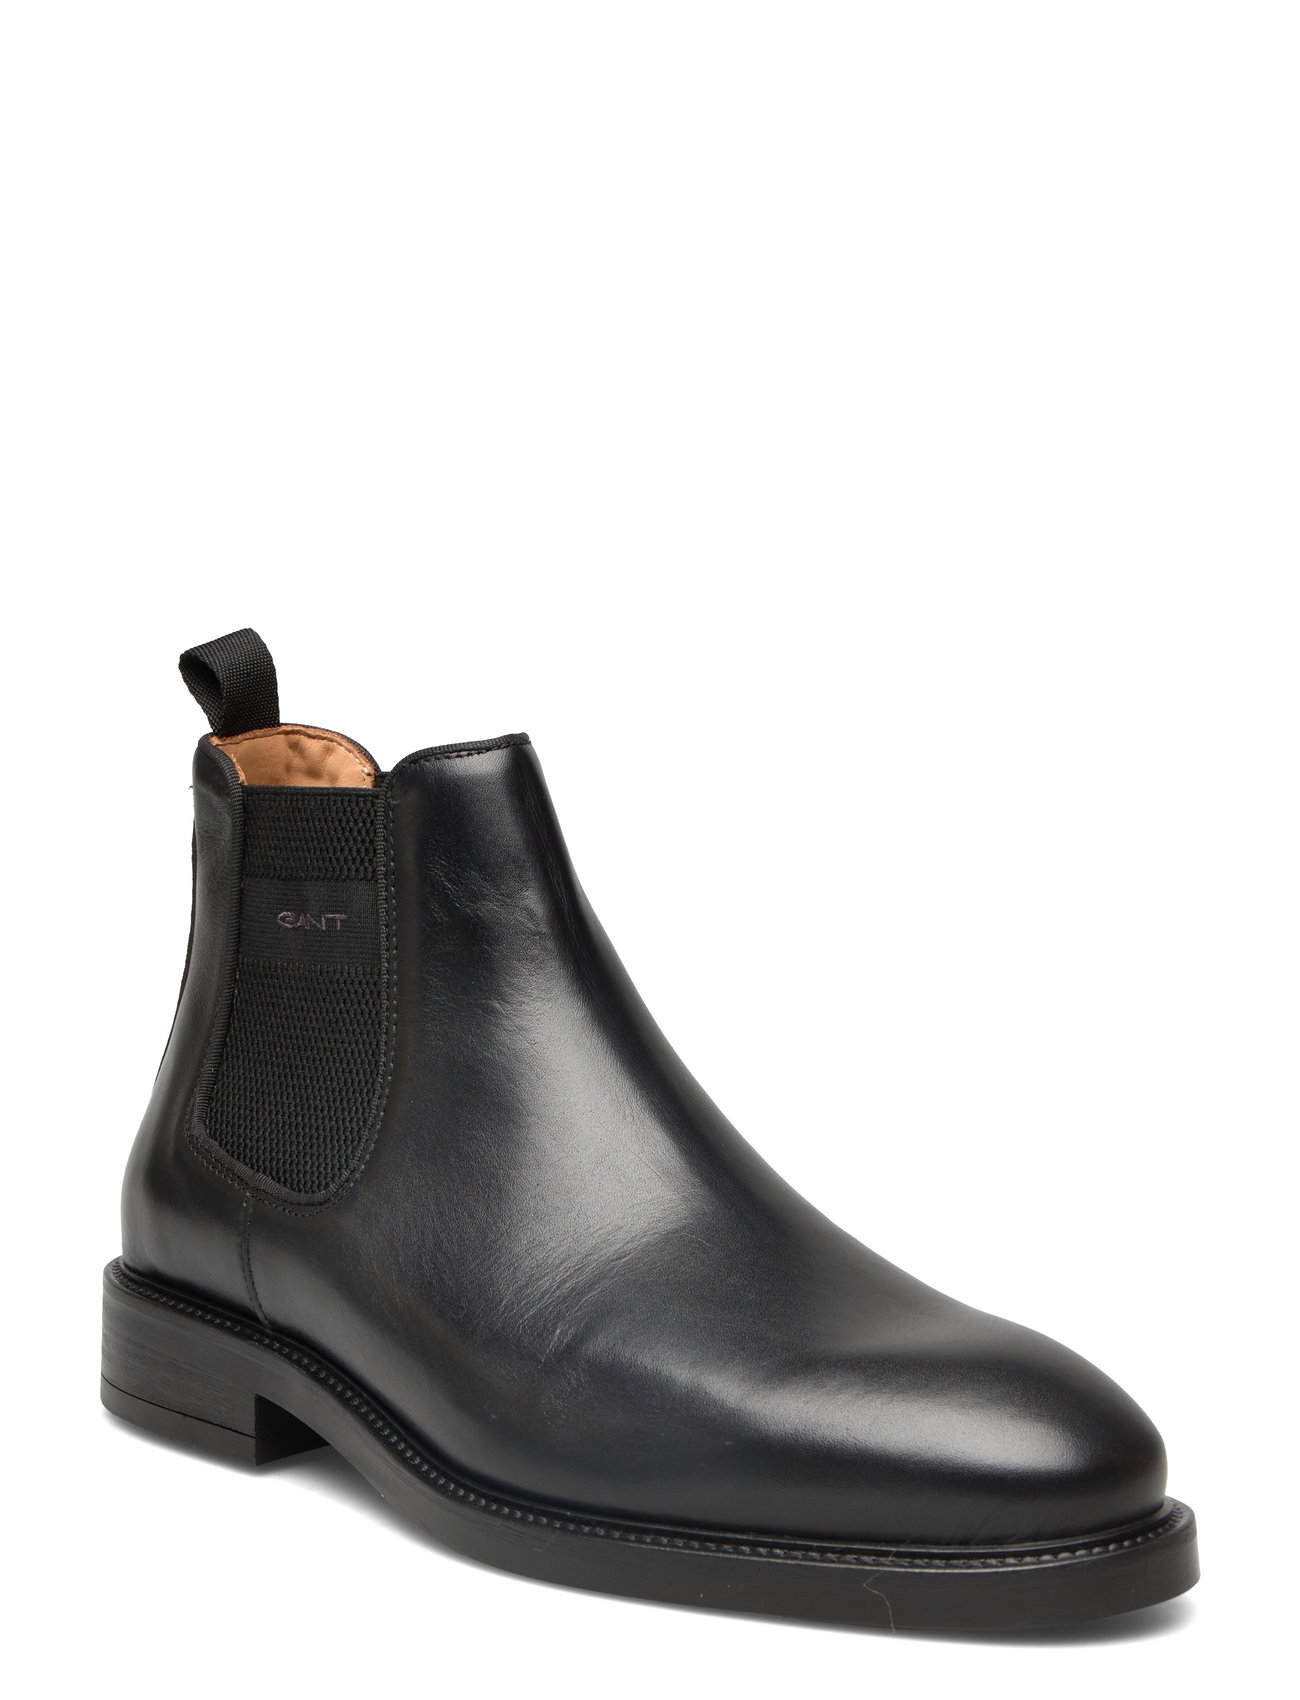 GANT Flairville Chelsea Boot - Chelsea boots - Boozt.com